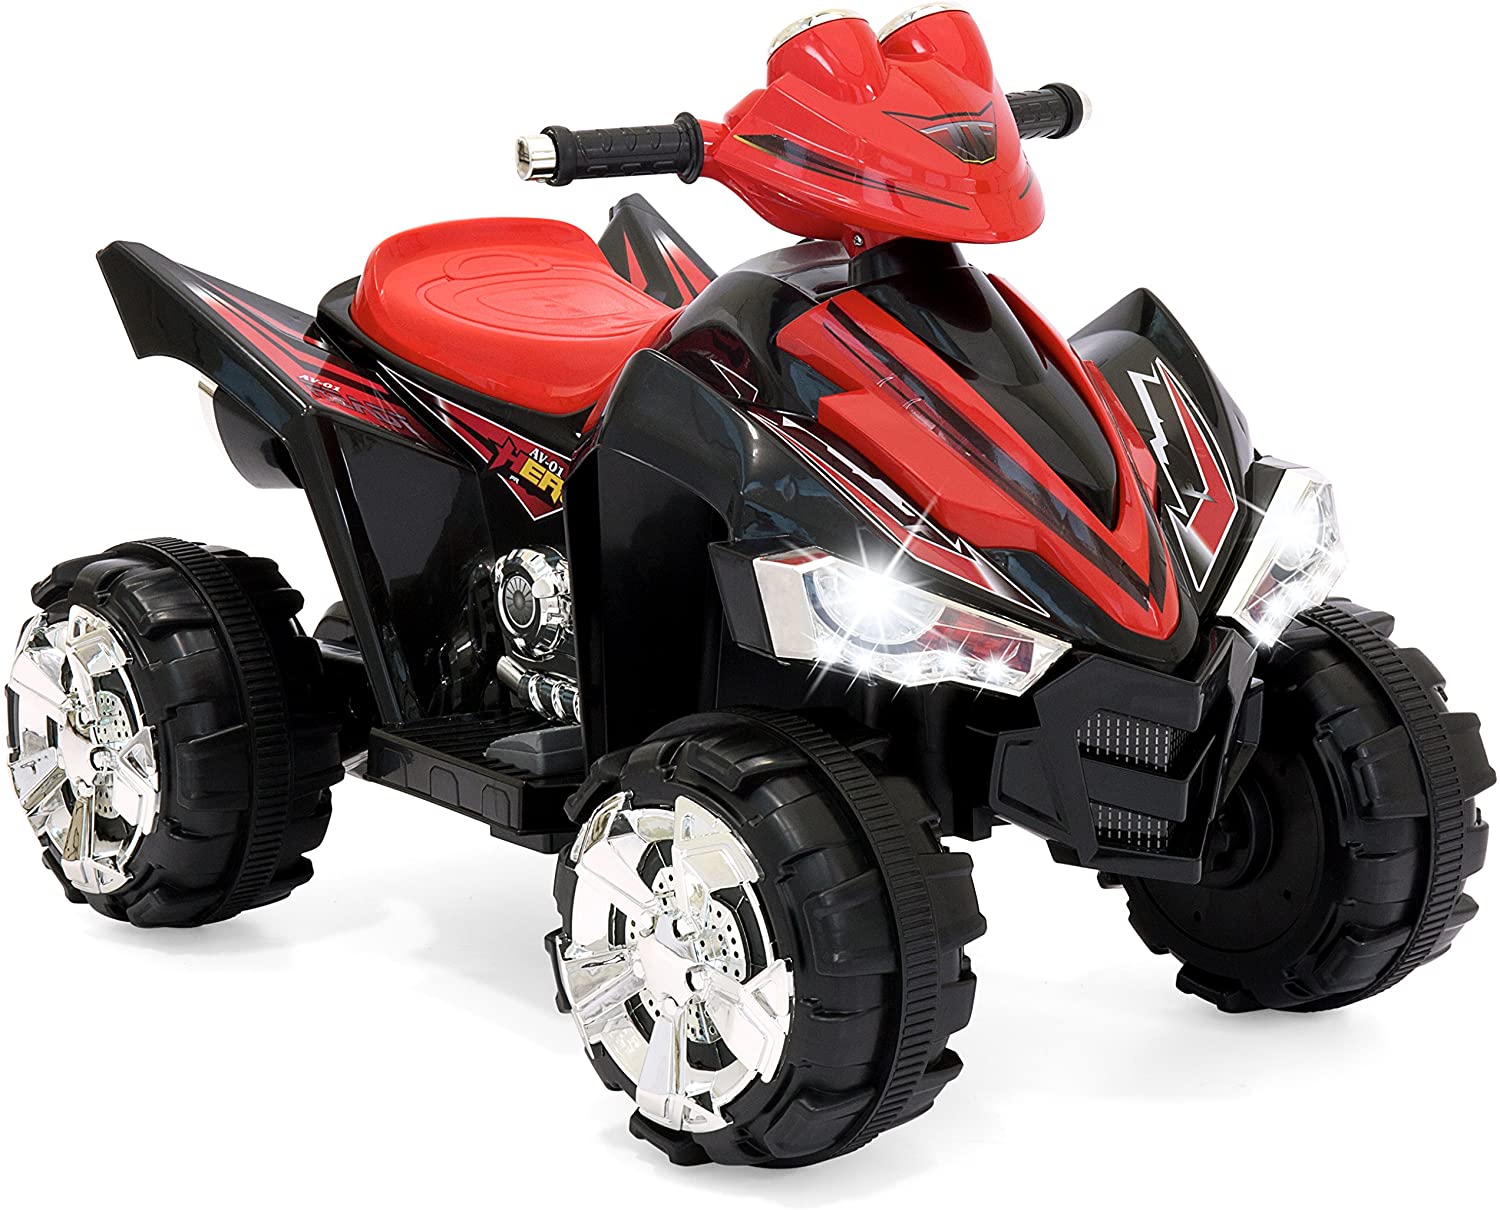 Best Choice Products 12V Kids Battery Powered Electric 4-Wheeler Quad ATV Ride On Toy w: 2 Speeds, LED Lights - Red